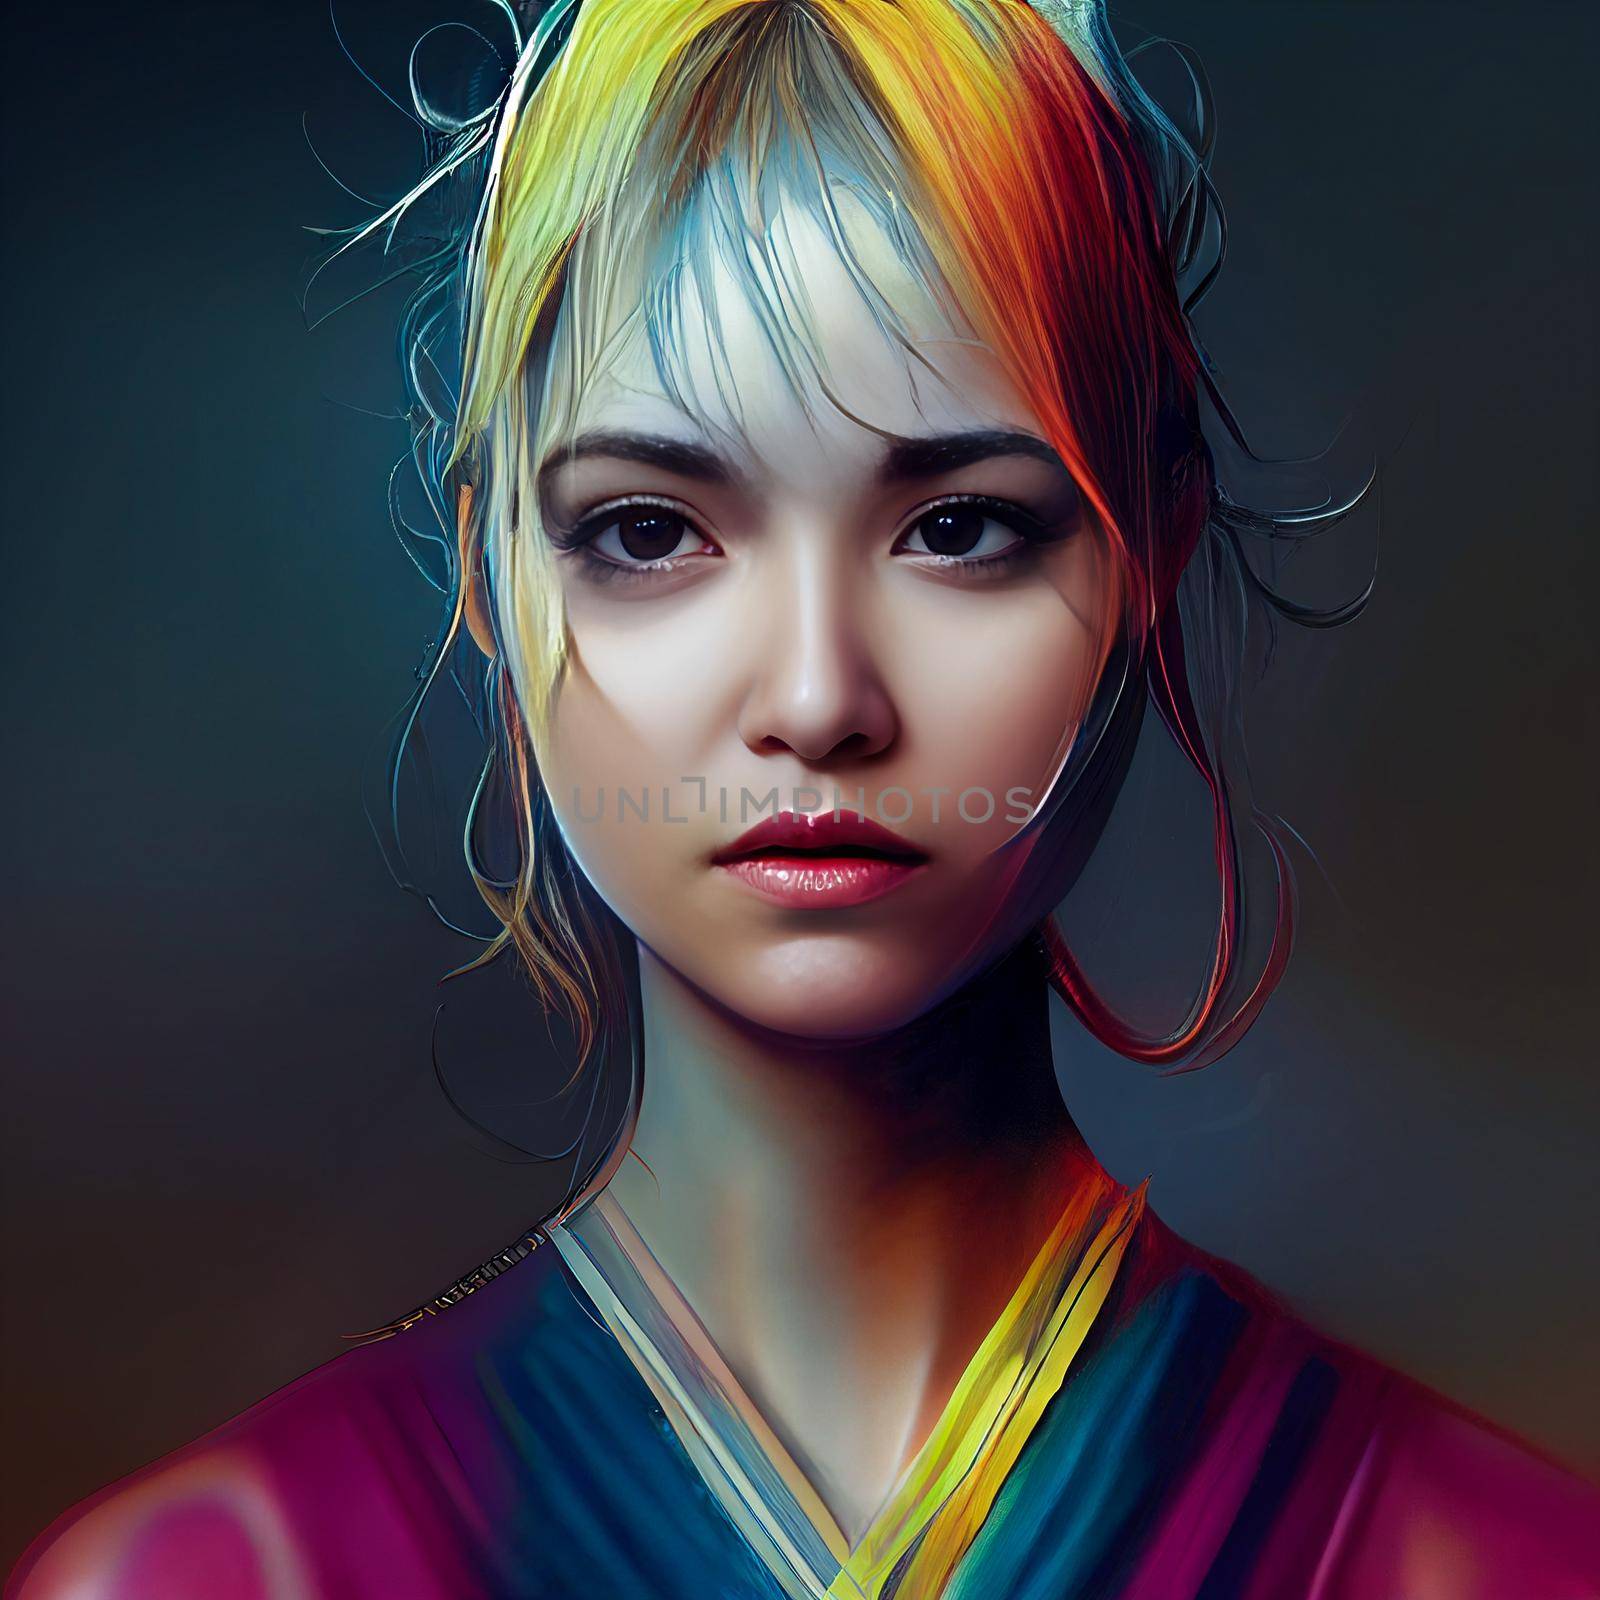 Young caucasian fashion model portrait. Stylish girl with vivid hair concept 3d illustration